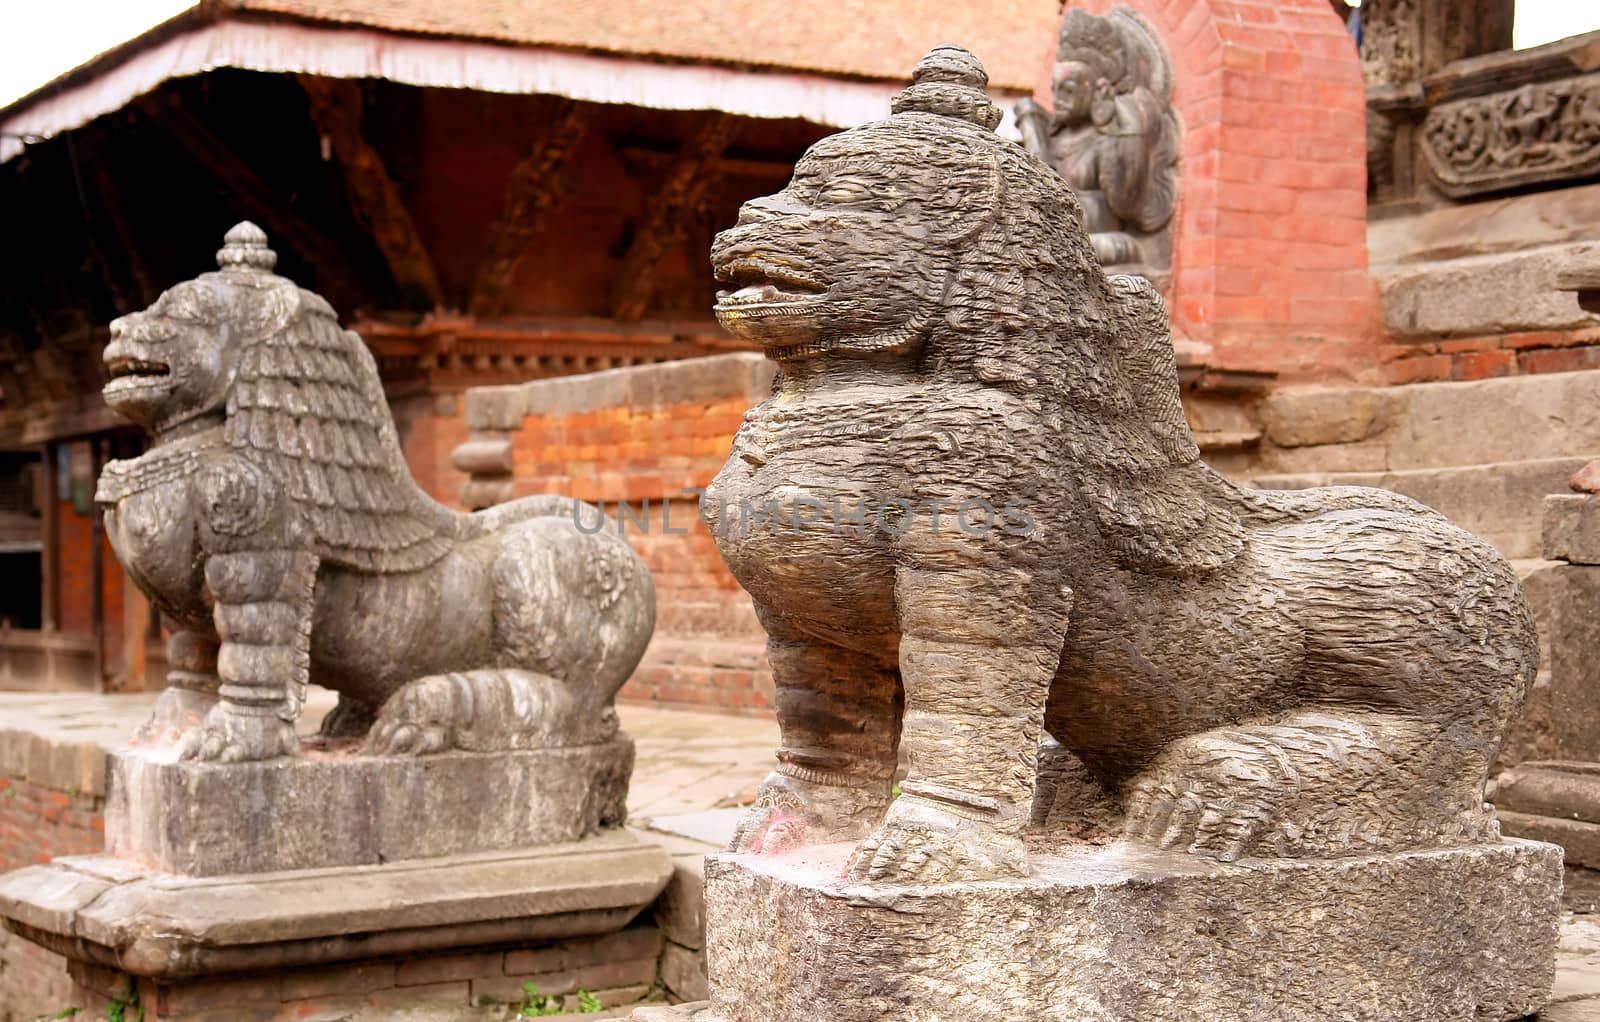 Durbar Square building - Hindu temples in the ancient city, vall by ptxgarfield